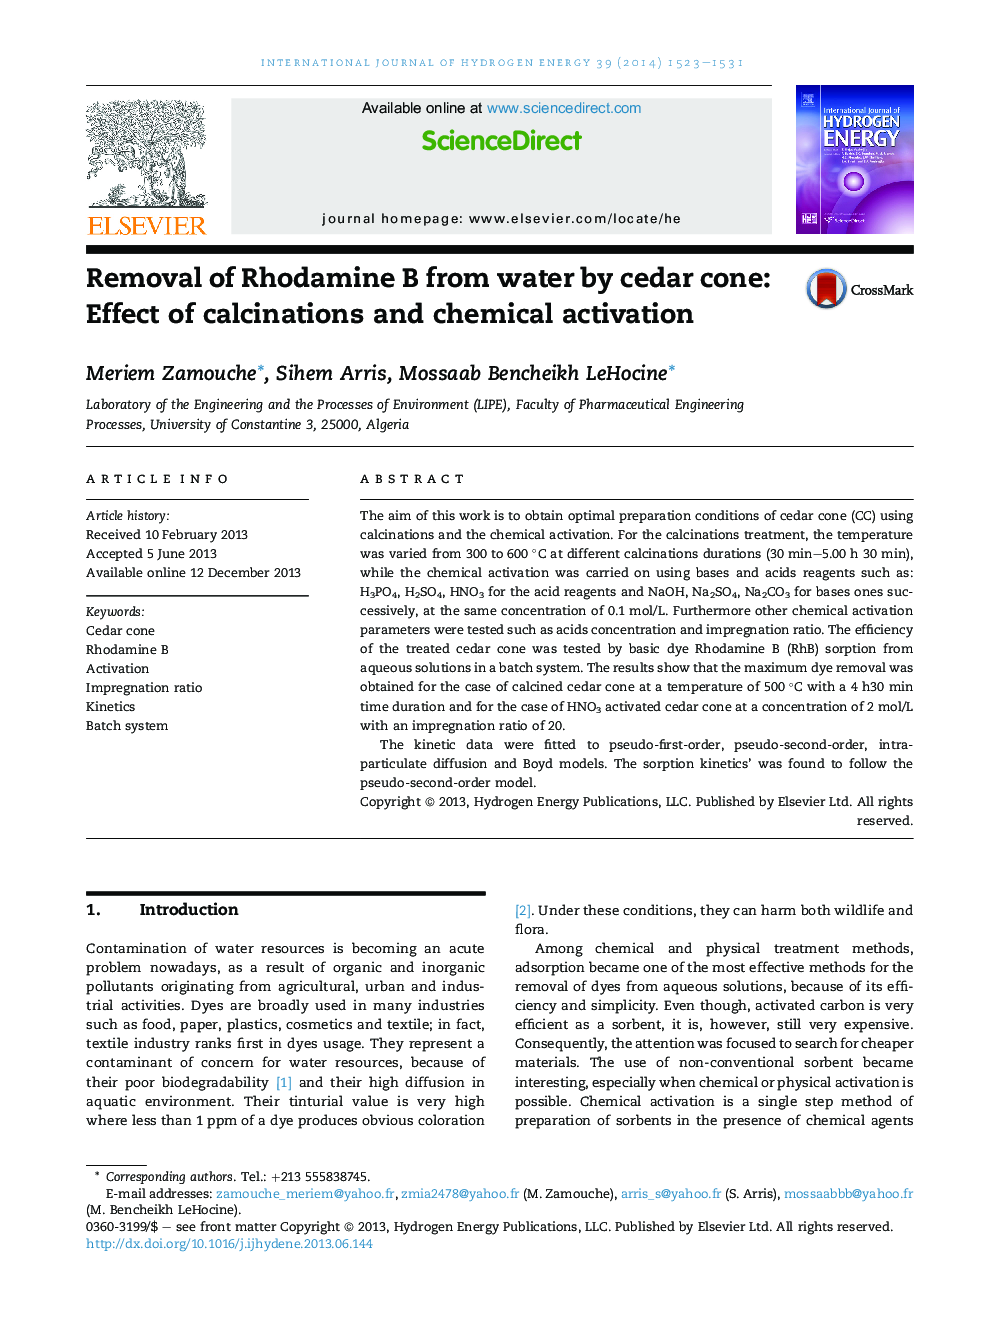 Removal of Rhodamine B from water by cedar cone: Effect of calcinations and chemical activation